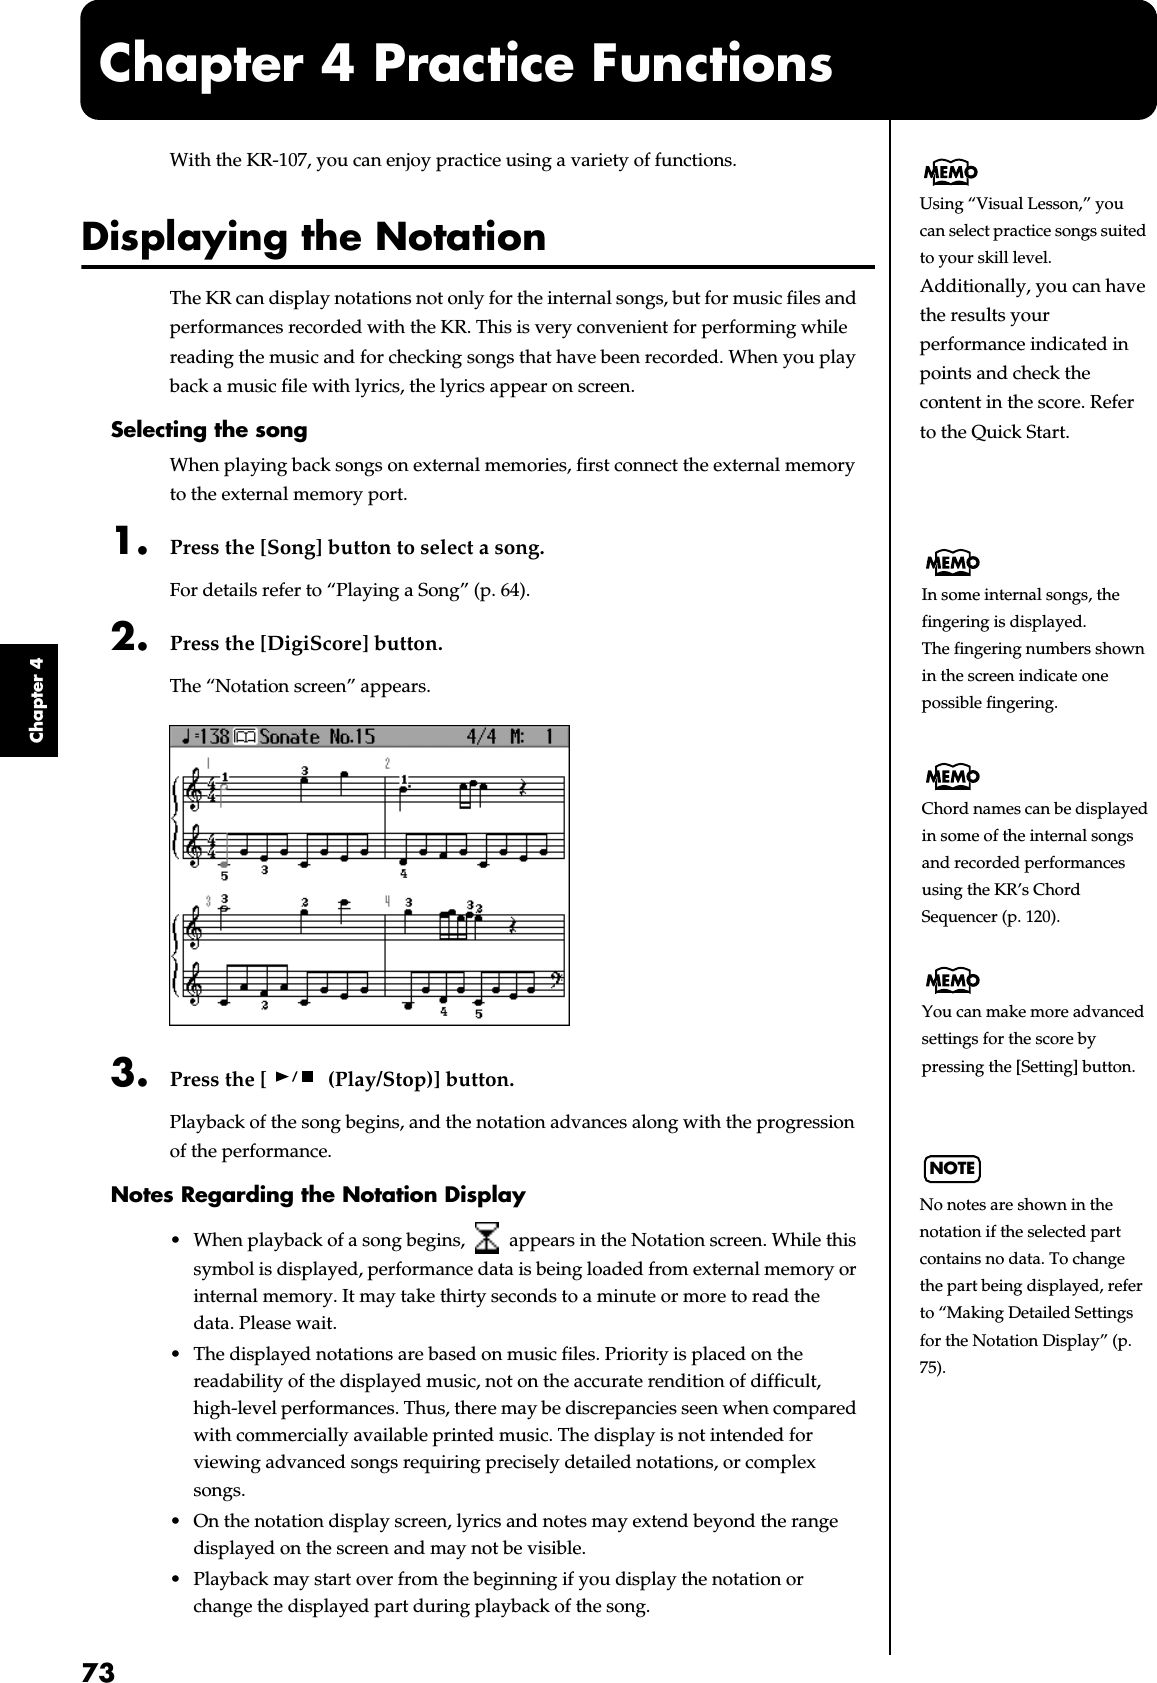 73Chapter 4Chapter 4 Practice FunctionsWith the KR-107, you can enjoy practice using a variety of functions.Displaying the NotationThe KR can display notations not only for the internal songs, but for music files and performances recorded with the KR. This is very convenient for performing while reading the music and for checking songs that have been recorded. When you play back a music file with lyrics, the lyrics appear on screen.Selecting the songWhen playing back songs on external memories, first connect the external memory to the external memory port.1. Press the [Song] button to select a song.For details refer to “Playing a Song” (p. 64).2. Press the [DigiScore] button.The “Notation screen” appears.fig.d-notation.eps_603. Press the [  (Play/Stop)] button.Playback of the song begins, and the notation advances along with the progression of the performance.Notes Regarding the Notation Display• When playback of a song begins,   appears in the Notation screen. While this symbol is displayed, performance data is being loaded from external memory or internal memory. It may take thirty seconds to a minute or more to read the data. Please wait.• The displayed notations are based on music files. Priority is placed on the readability of the displayed music, not on the accurate rendition of difficult, high-level performances. Thus, there may be discrepancies seen when compared with commercially available printed music. The display is not intended for viewing advanced songs requiring precisely detailed notations, or complex songs.• On the notation display screen, lyrics and notes may extend beyond the range displayed on the screen and may not be visible.• Playback may start over from the beginning if you display the notation or change the displayed part during playback of the song.Using “Visual Lesson,” you can select practice songs suited to your skill level. Additionally, you can have the results your performance indicated in points and check the content in the score. Refer to the Quick Start.In some internal songs, the fingering is displayed.The fingering numbers shown in the screen indicate one possible fingering.Chord names can be displayed in some of the internal songs and recorded performances using the KR’s Chord Sequencer (p. 120).You can make more advanced settings for the score by pressing the [Setting] button.NOTENo notes are shown in the notation if the selected part contains no data. To change the part being displayed, refer to “Making Detailed Settings for the Notation Display” (p. 75).